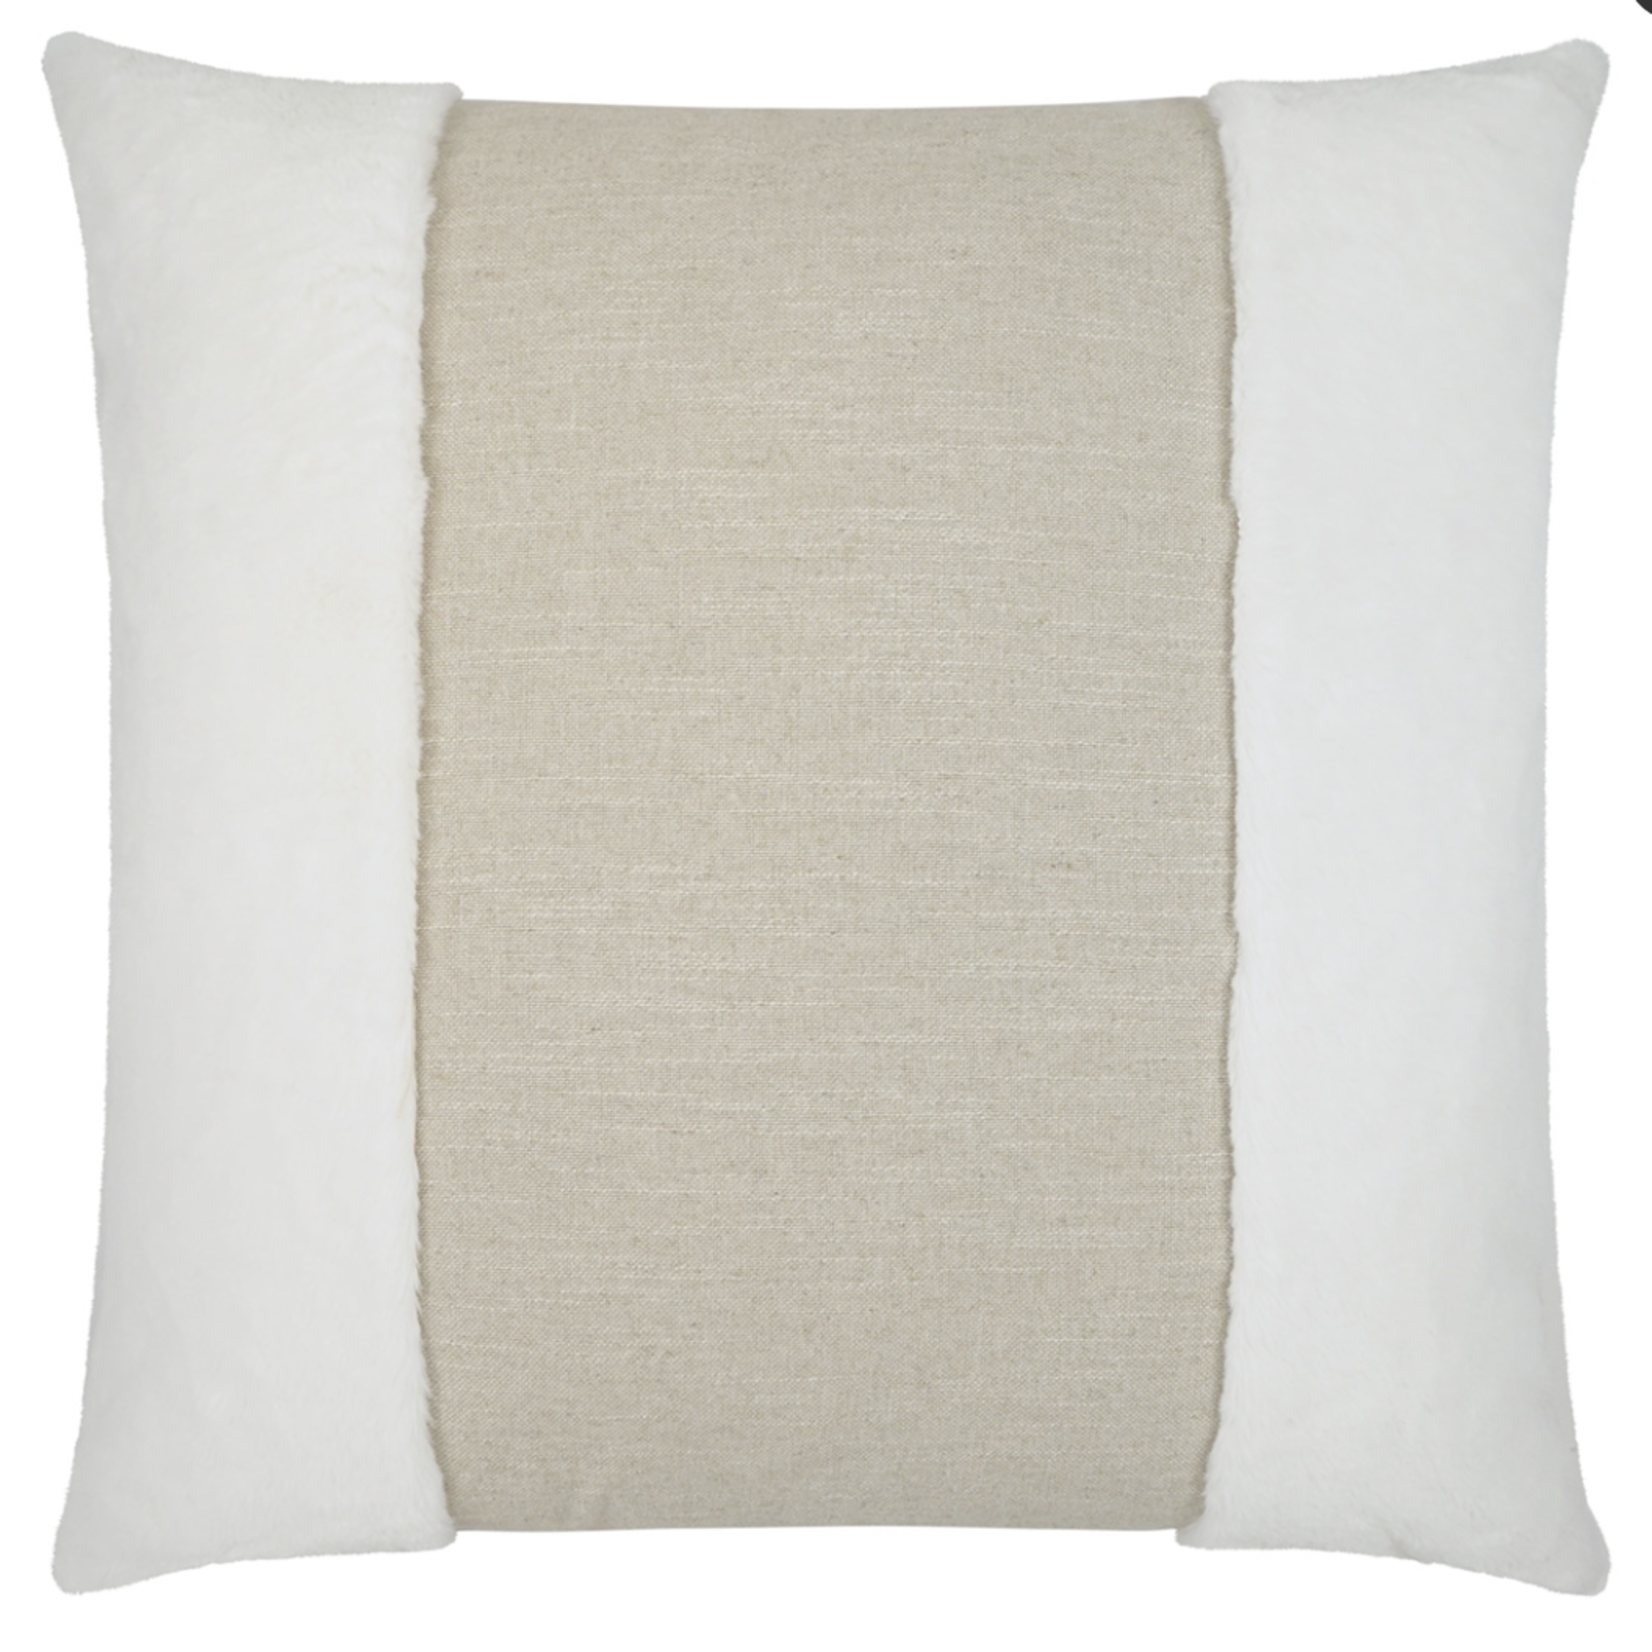 Outside The Box 24x24 Courchevel Feather Down Pillow In Swan